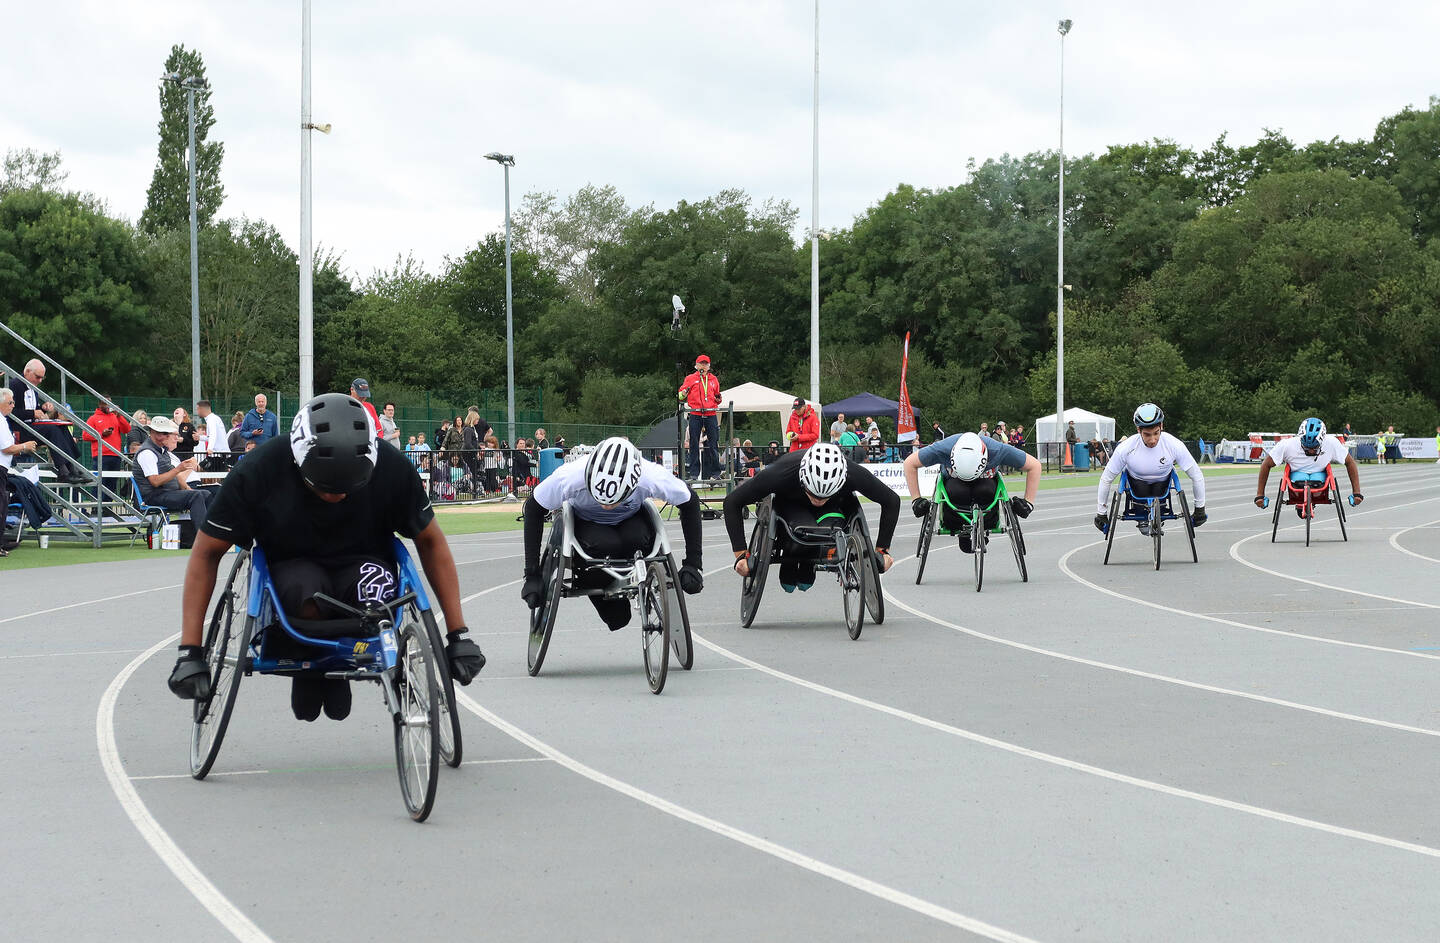 Five wheelchair racers line up on a track.